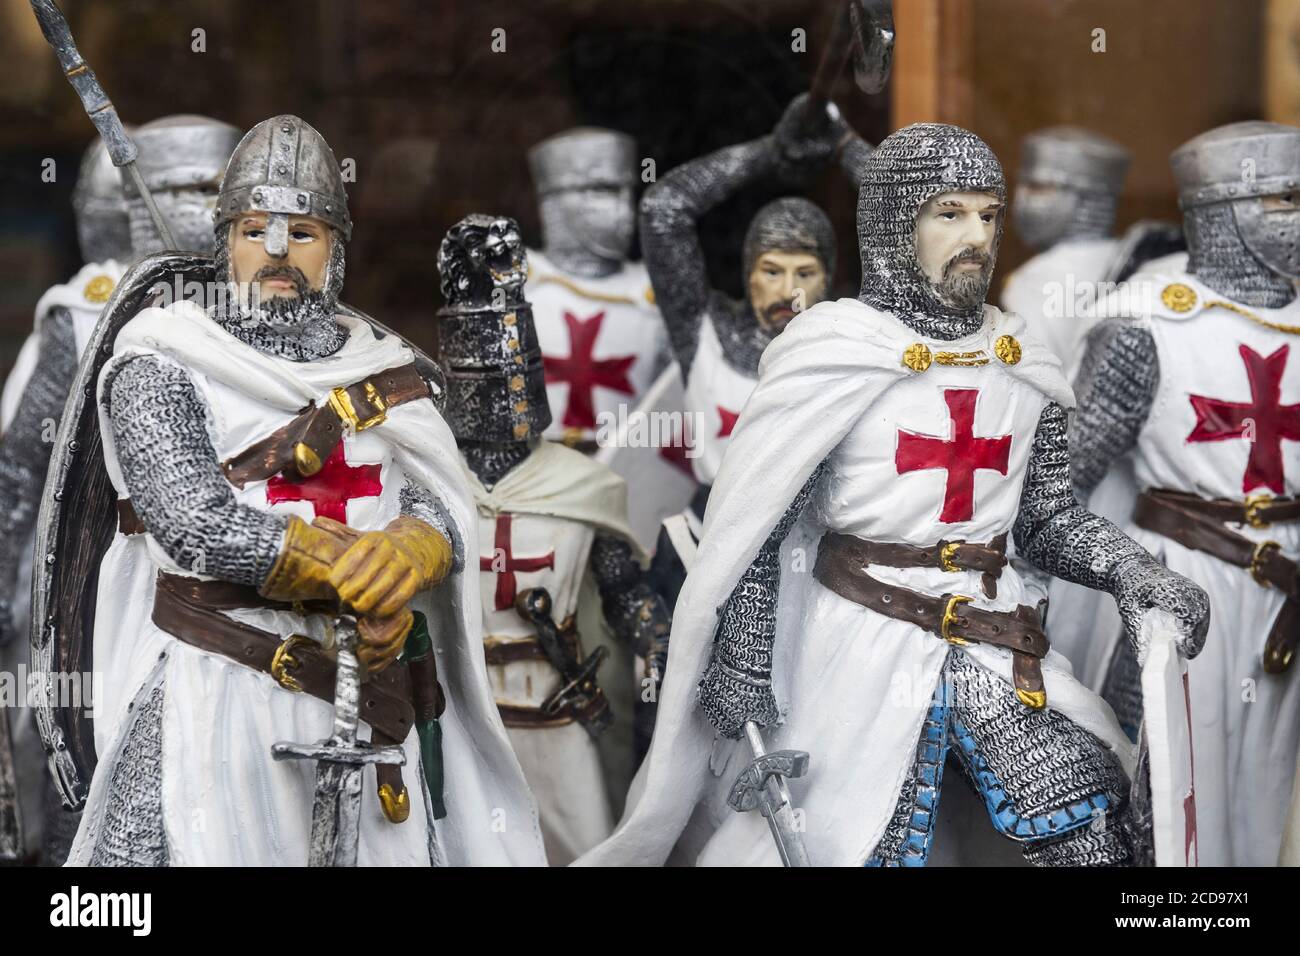 France, Calvados, Bayeux, figurines of Templars in the window of a shop Stock Photo